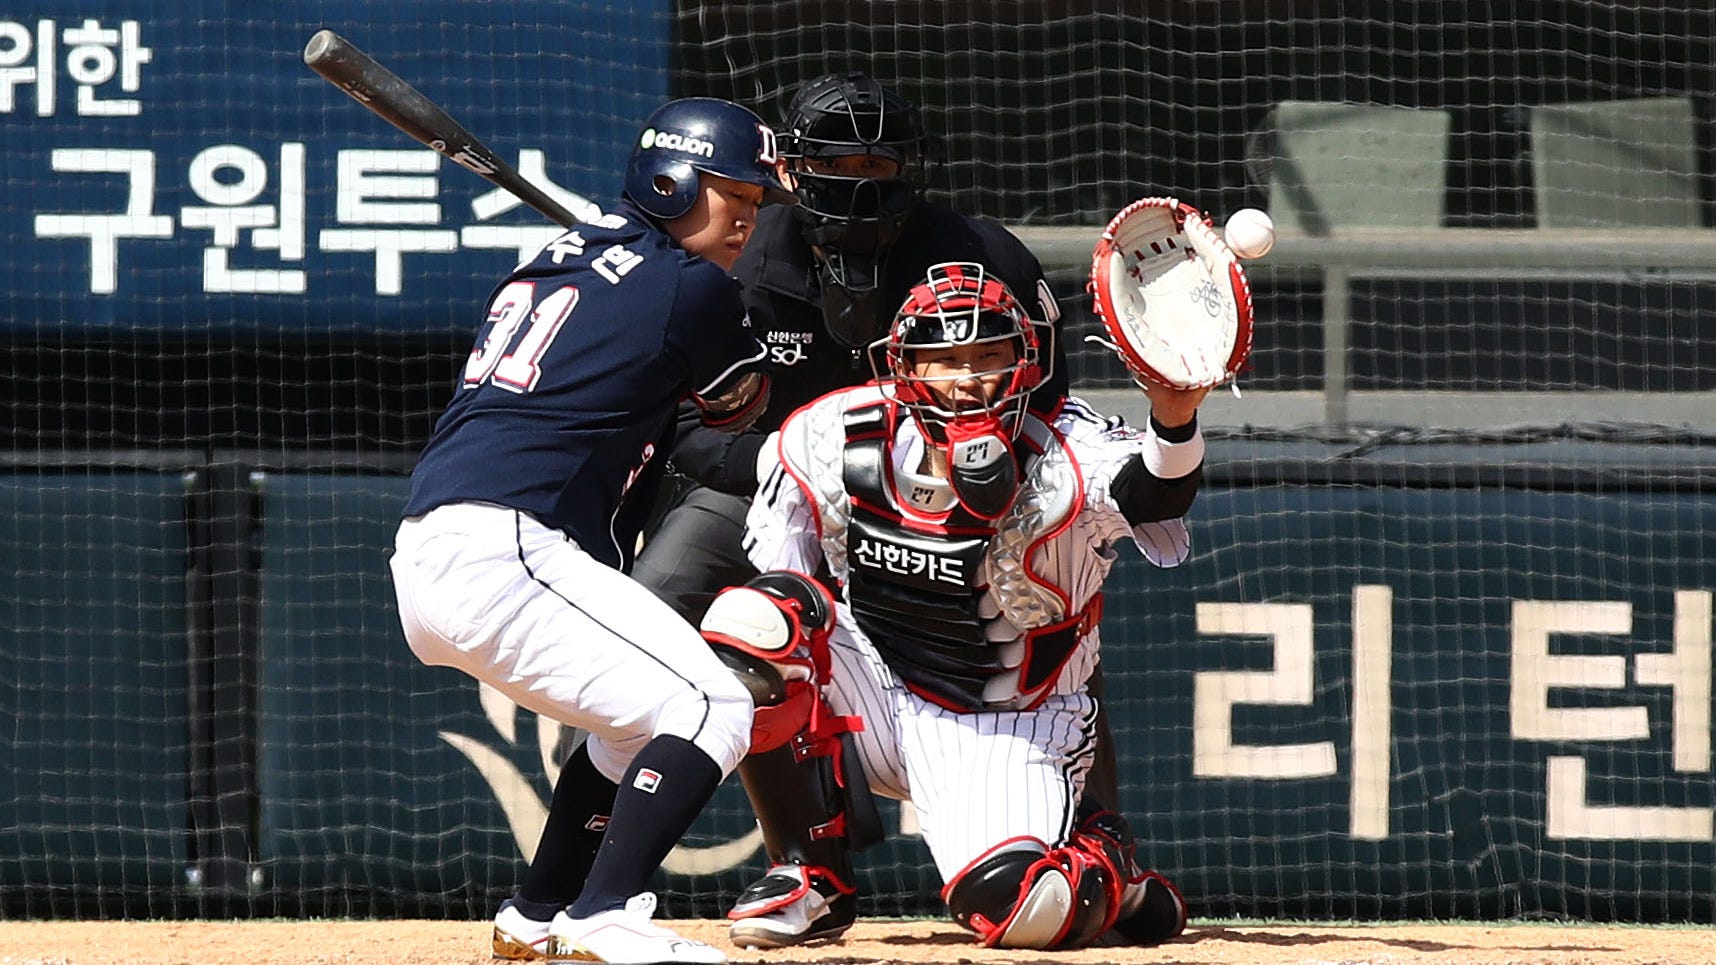 Kbo Baseball What To Know As League Gets Underway With Espn Exposure